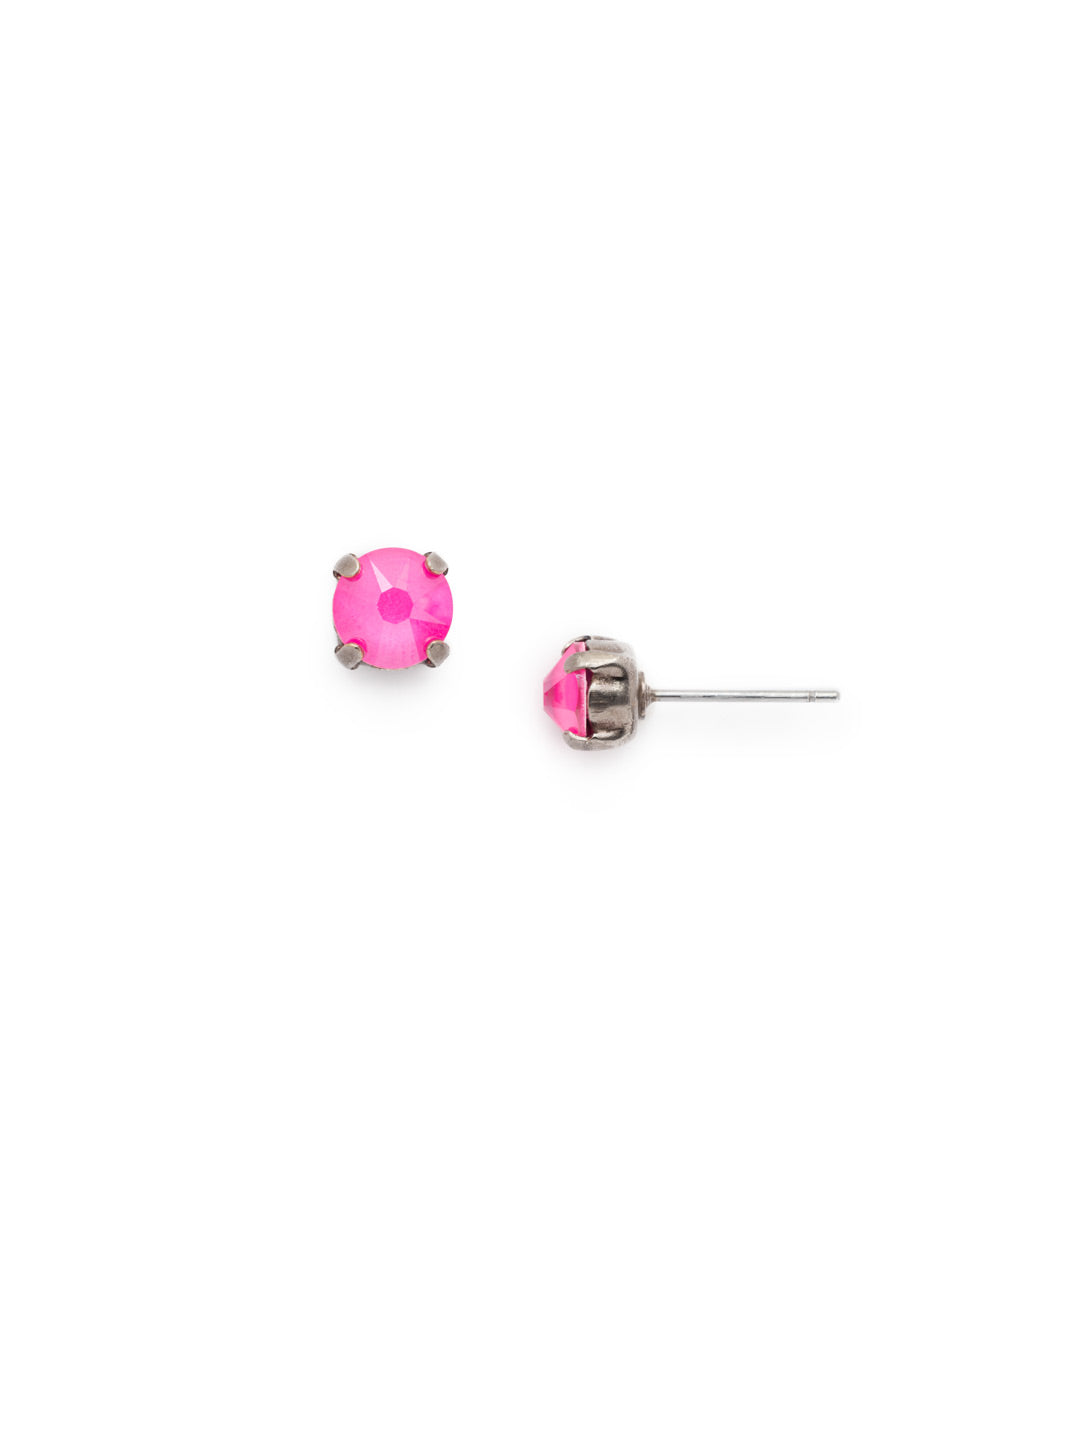 Jayda Stud Earrings - EDN32ASWDW - <p>The Jayda Stud Earrings are the perfect every day wardrobe staple. A round crystal nestles perfectly in a metal plated post with four prongs. </p><p>Need help picking a stud? <a href="https://www.sorrelli.com/blogs/sisterhood/round-stud-earrings-101-a-rundown-of-sizes-styles-and-sparkle">Check out our size guide!</a> From Sorrelli's Wild Watermelon collection in our Antique Silver-tone finish.</p>